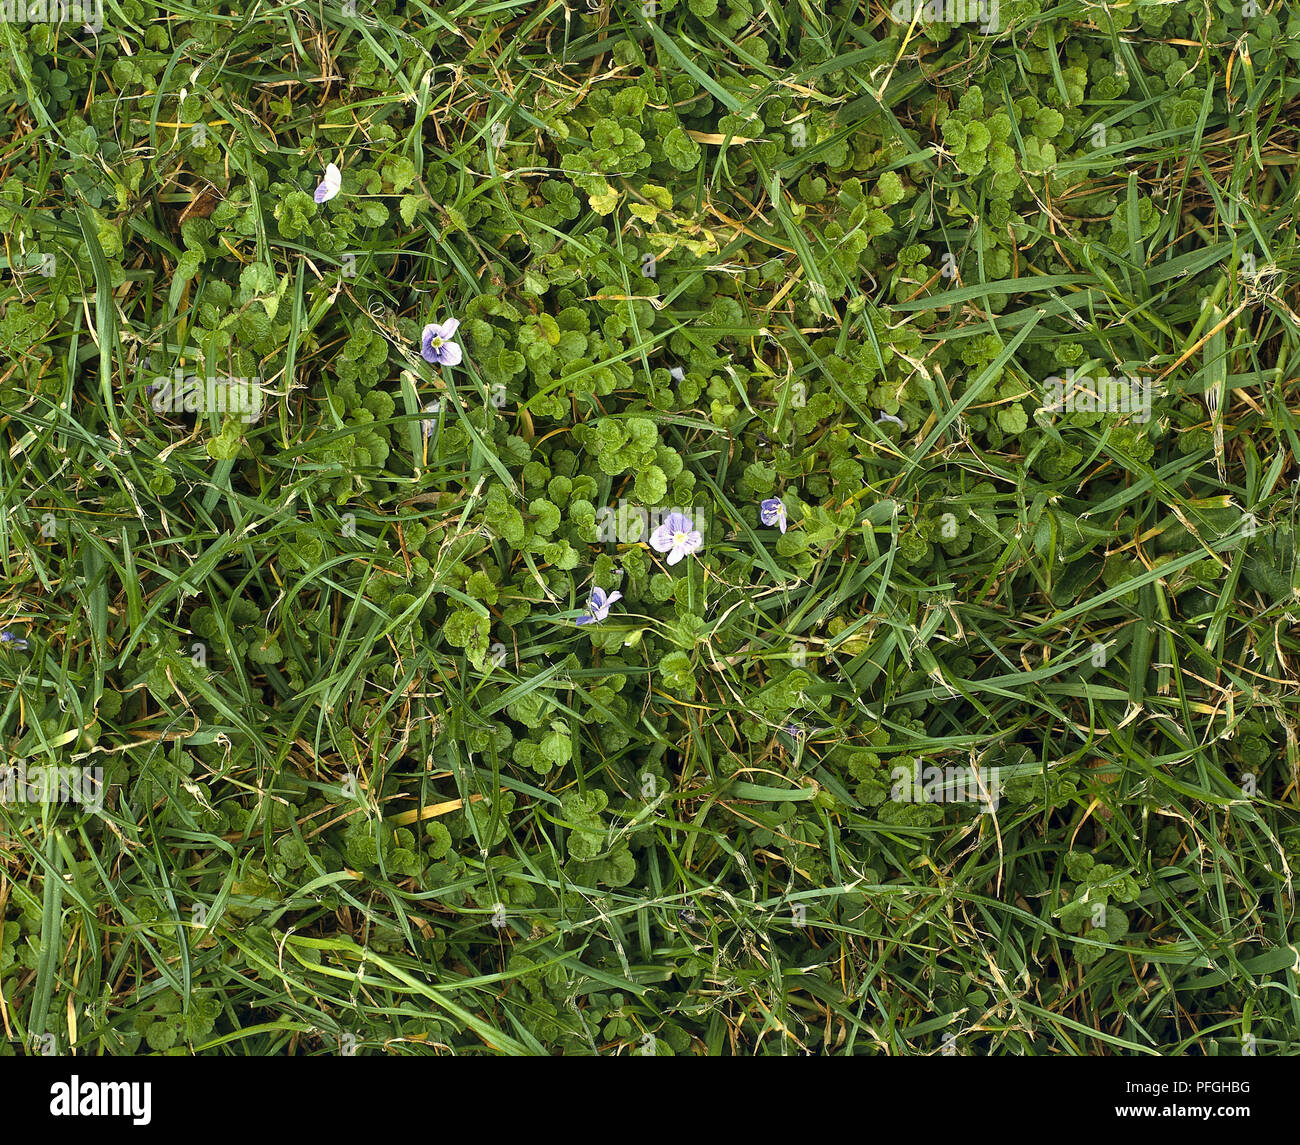 Veronica filiformis, small blue flowers of Slender Speedwell, growing in grass, view from above Stock Photo